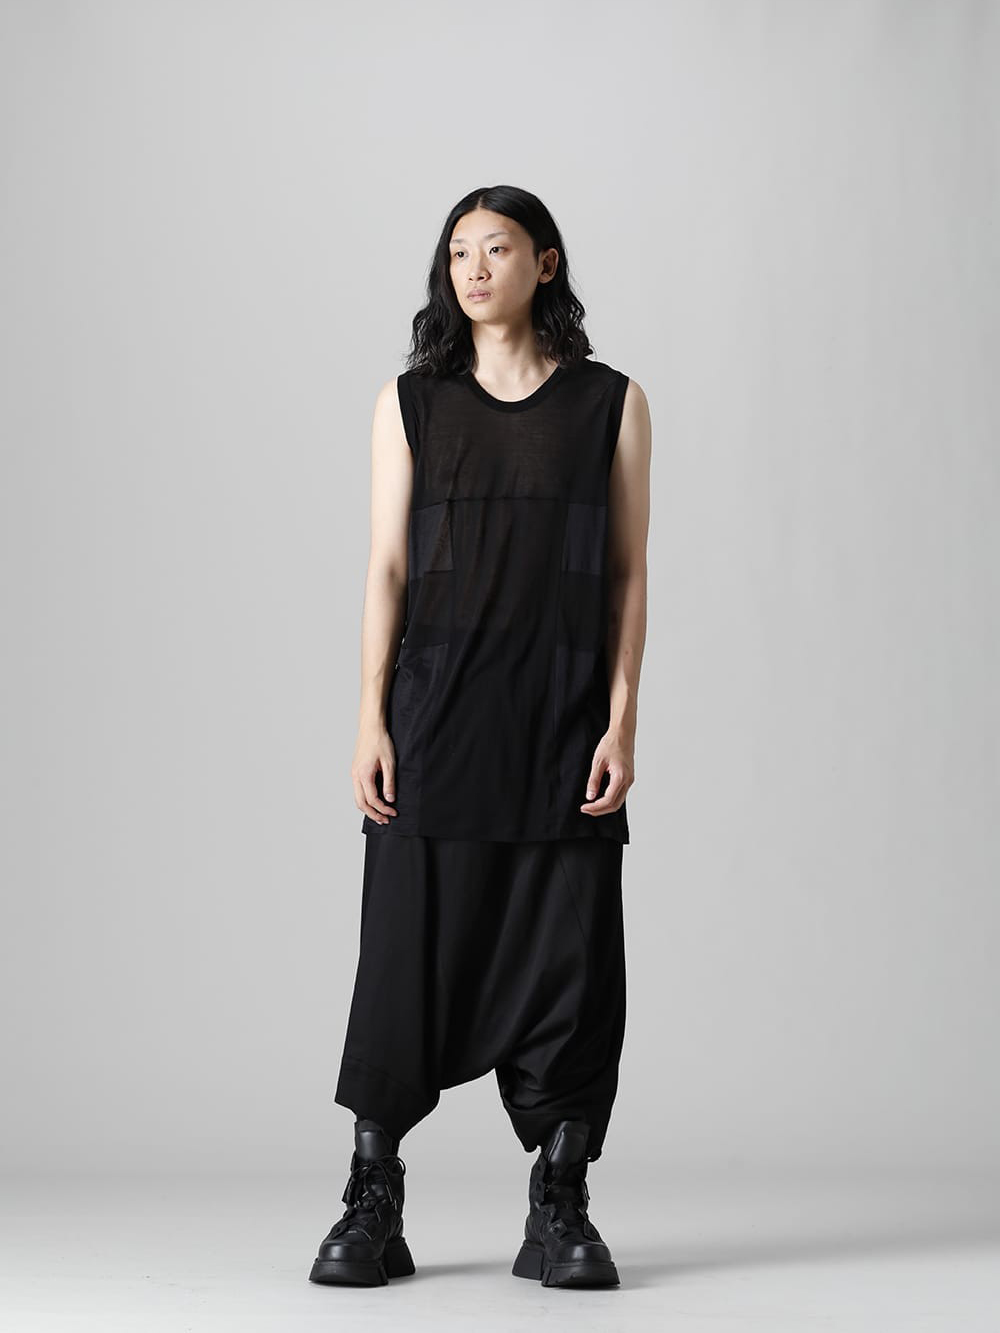 Now in stock is the 5th delivery from the spring/summer collection of JULIUS 2022. Both in-store and online available now - Whole body front A cut sew that you can enjoy layering with a see-through and cool impression. - 777CUM6(Cotton Sheer Jersey No Sleeve Cutsewn) - 1-018